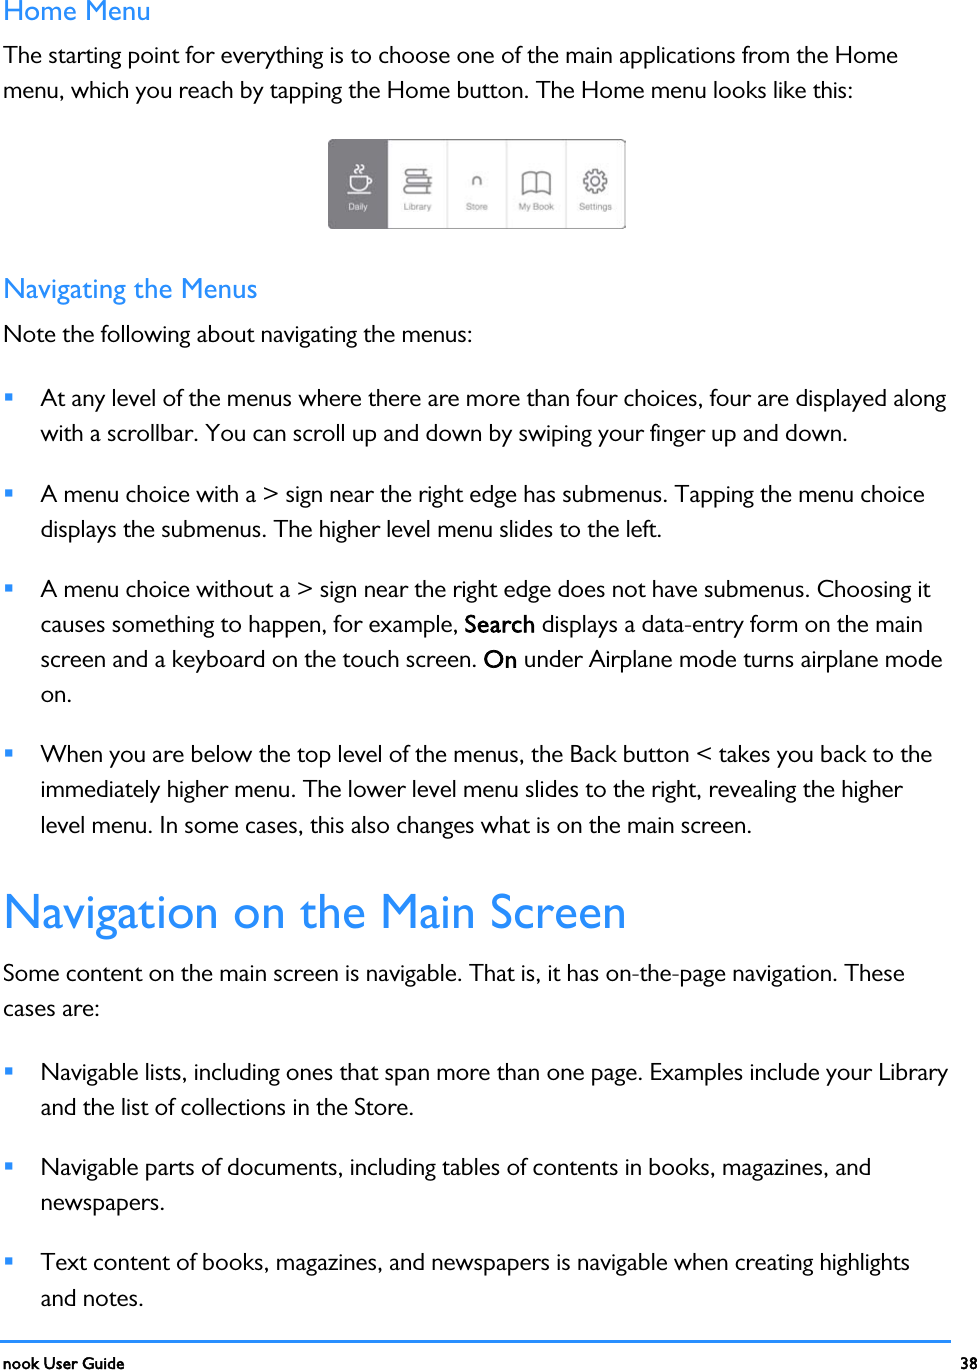  nook User Guide    38        Home Menu The starting point for everything is to choose one of the main applications from the Home menu, which you reach by tapping the Home button. The Home menu looks like this:  Navigating the Menus Note the following about navigating the menus:  At any level of the menus where there are more than four choices, four are displayed along with a scrollbar. You can scroll up and down by swiping your finger up and down.  A menu choice with a &gt; sign near the right edge has submenus. Tapping the menu choice displays the submenus. The higher level menu slides to the left.  A menu choice without a &gt; sign near the right edge does not have submenus. Choosing it causes something to happen, for example, Search displays a data-entry form on the main screen and a keyboard on the touch screen. On under Airplane mode turns airplane mode on.  When you are below the top level of the menus, the Back button &lt; takes you back to the immediately higher menu. The lower level menu slides to the right, revealing the higher level menu. In some cases, this also changes what is on the main screen. Navigation on the Main Screen Some content on the main screen is navigable. That is, it has on-the-page navigation. These cases are:  Navigable lists, including ones that span more than one page. Examples include your Library and the list of collections in the Store.  Navigable parts of documents, including tables of contents in books, magazines, and newspapers.  Text content of books, magazines, and newspapers is navigable when creating highlights and notes. 